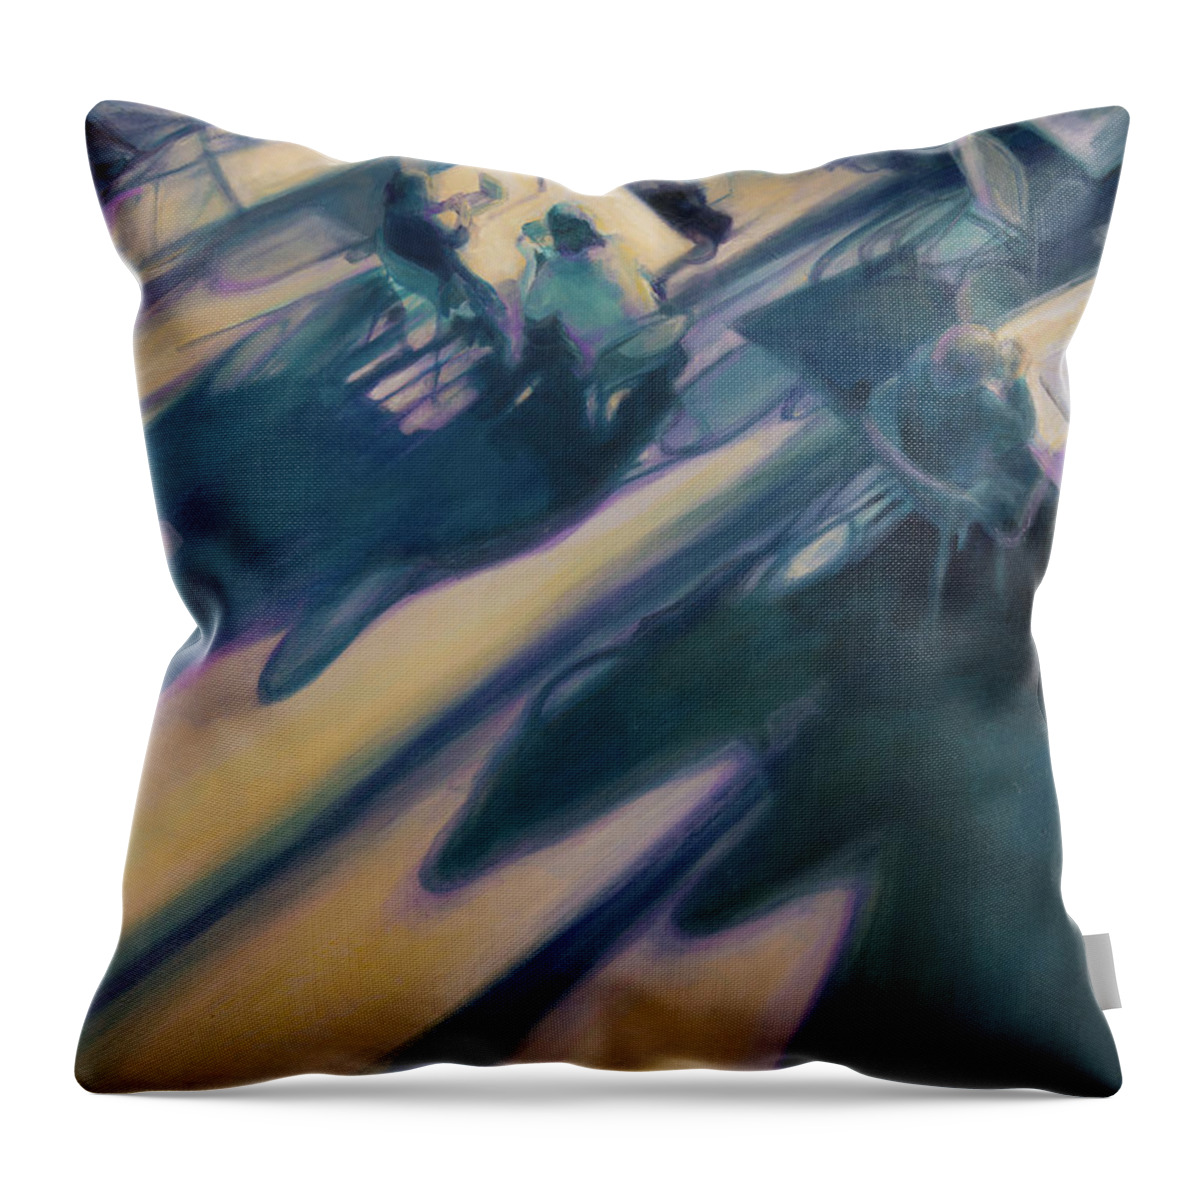 Blue Throw Pillow featuring the painting Alone Together by Carol Klingel